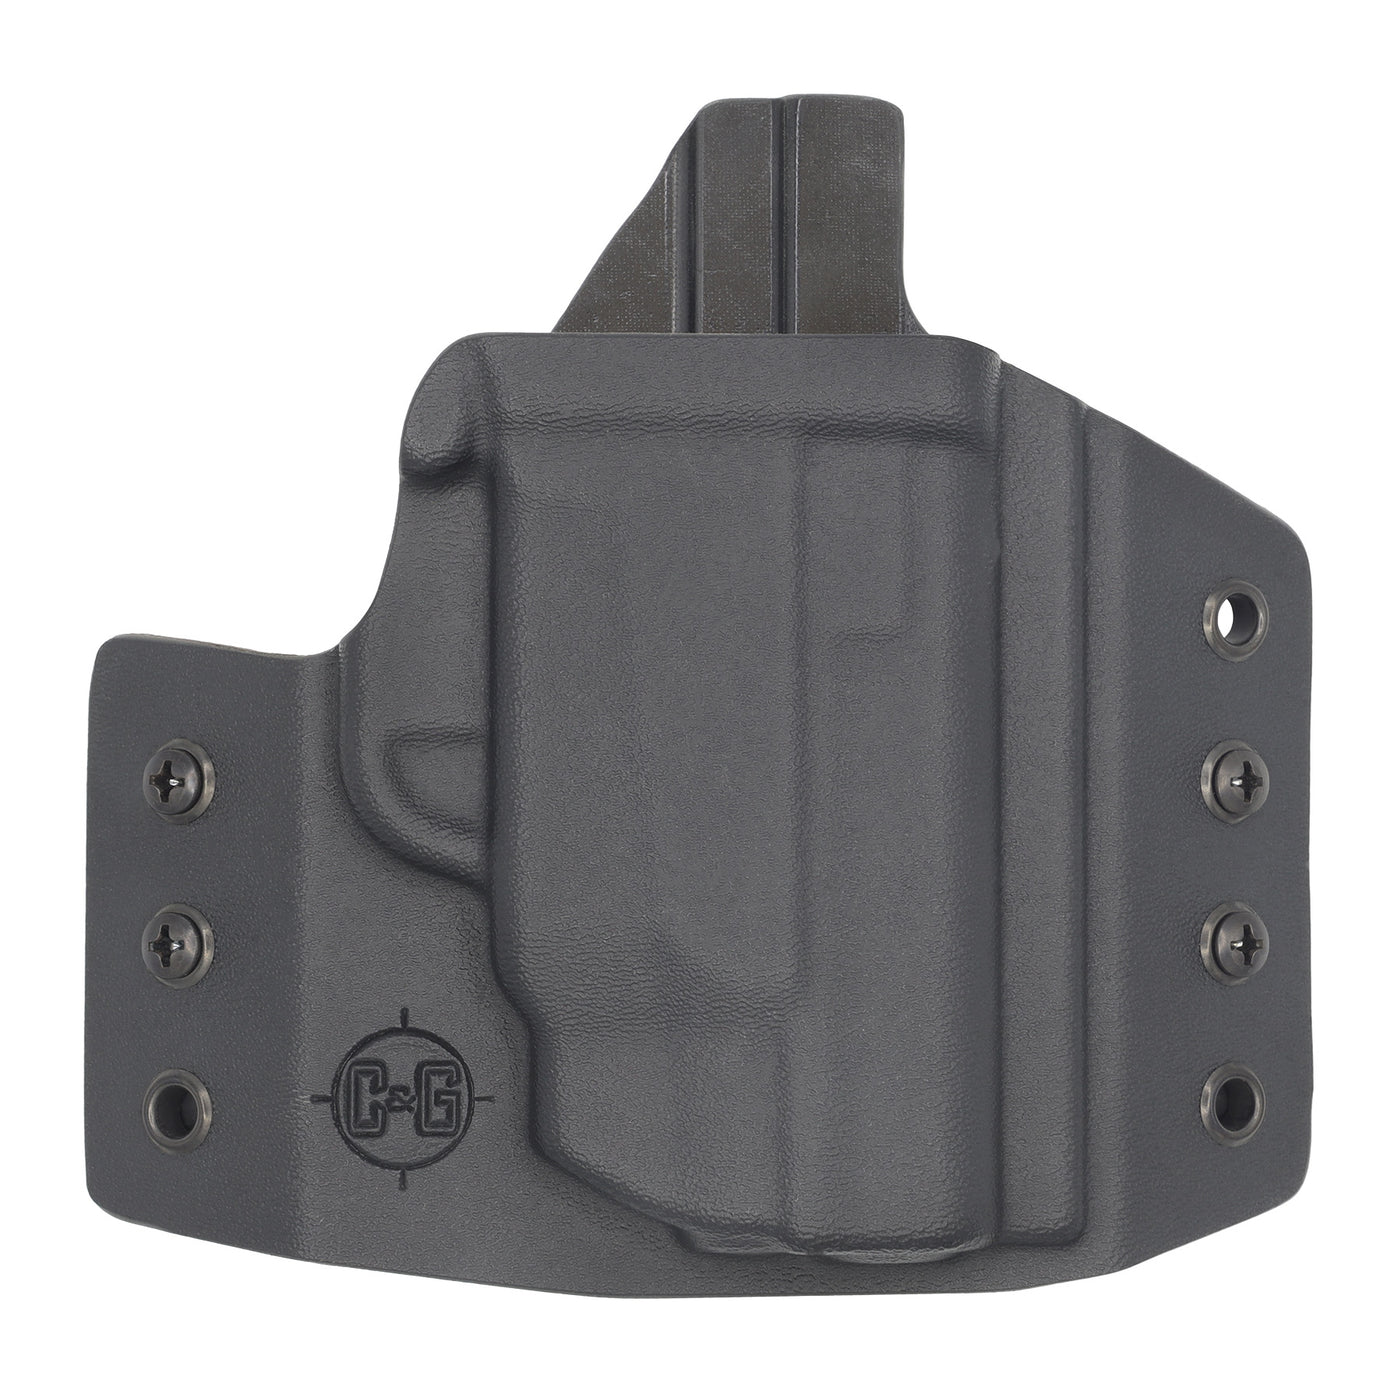 This is the custom C&G Holsters Covert series (OWB) outside the waistband Holster for the Smith & Wesson M&P Shield with crimson trace laser.